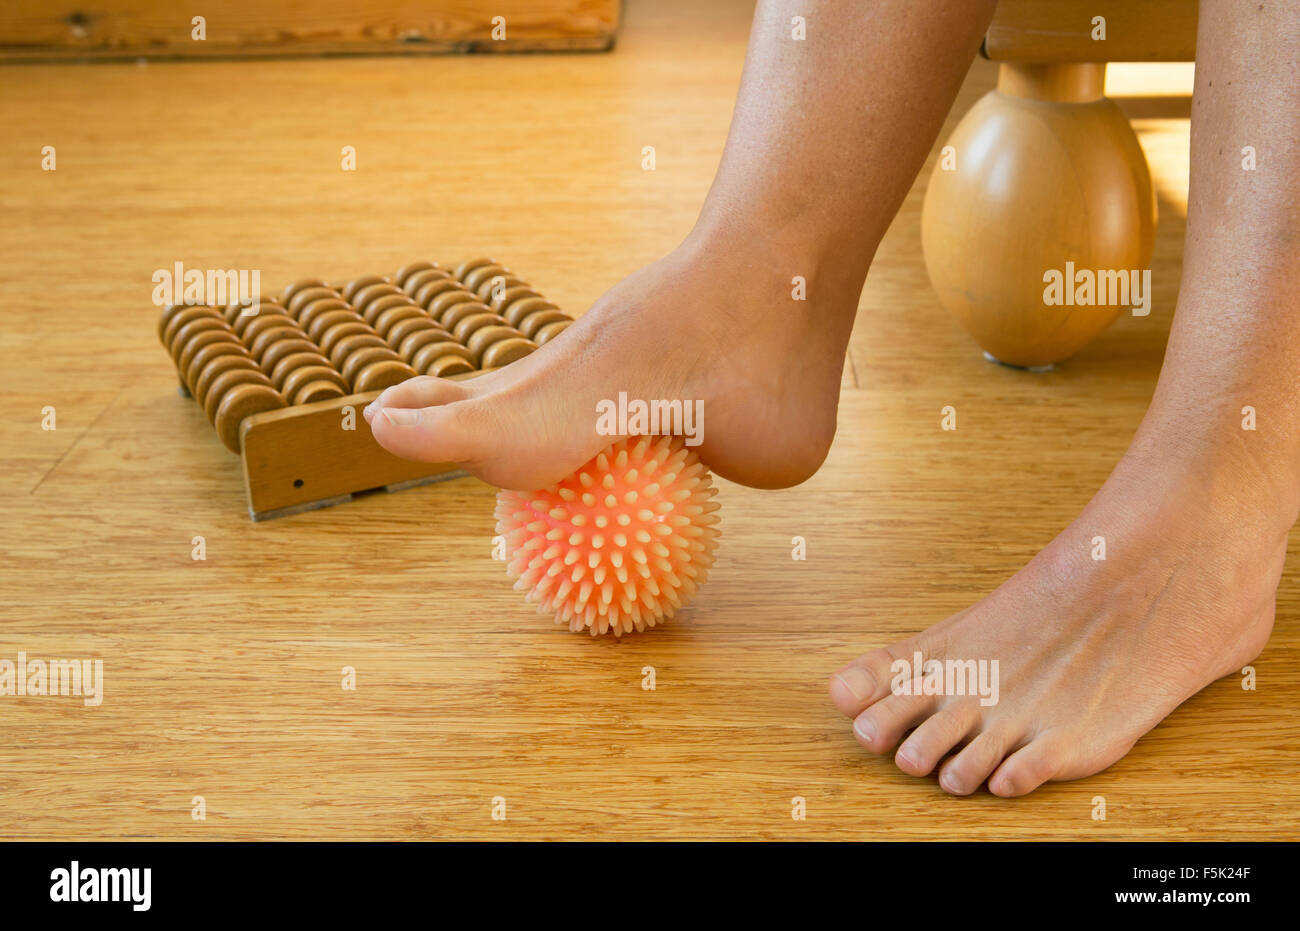 foot in with rubber massage ball Stock Photo